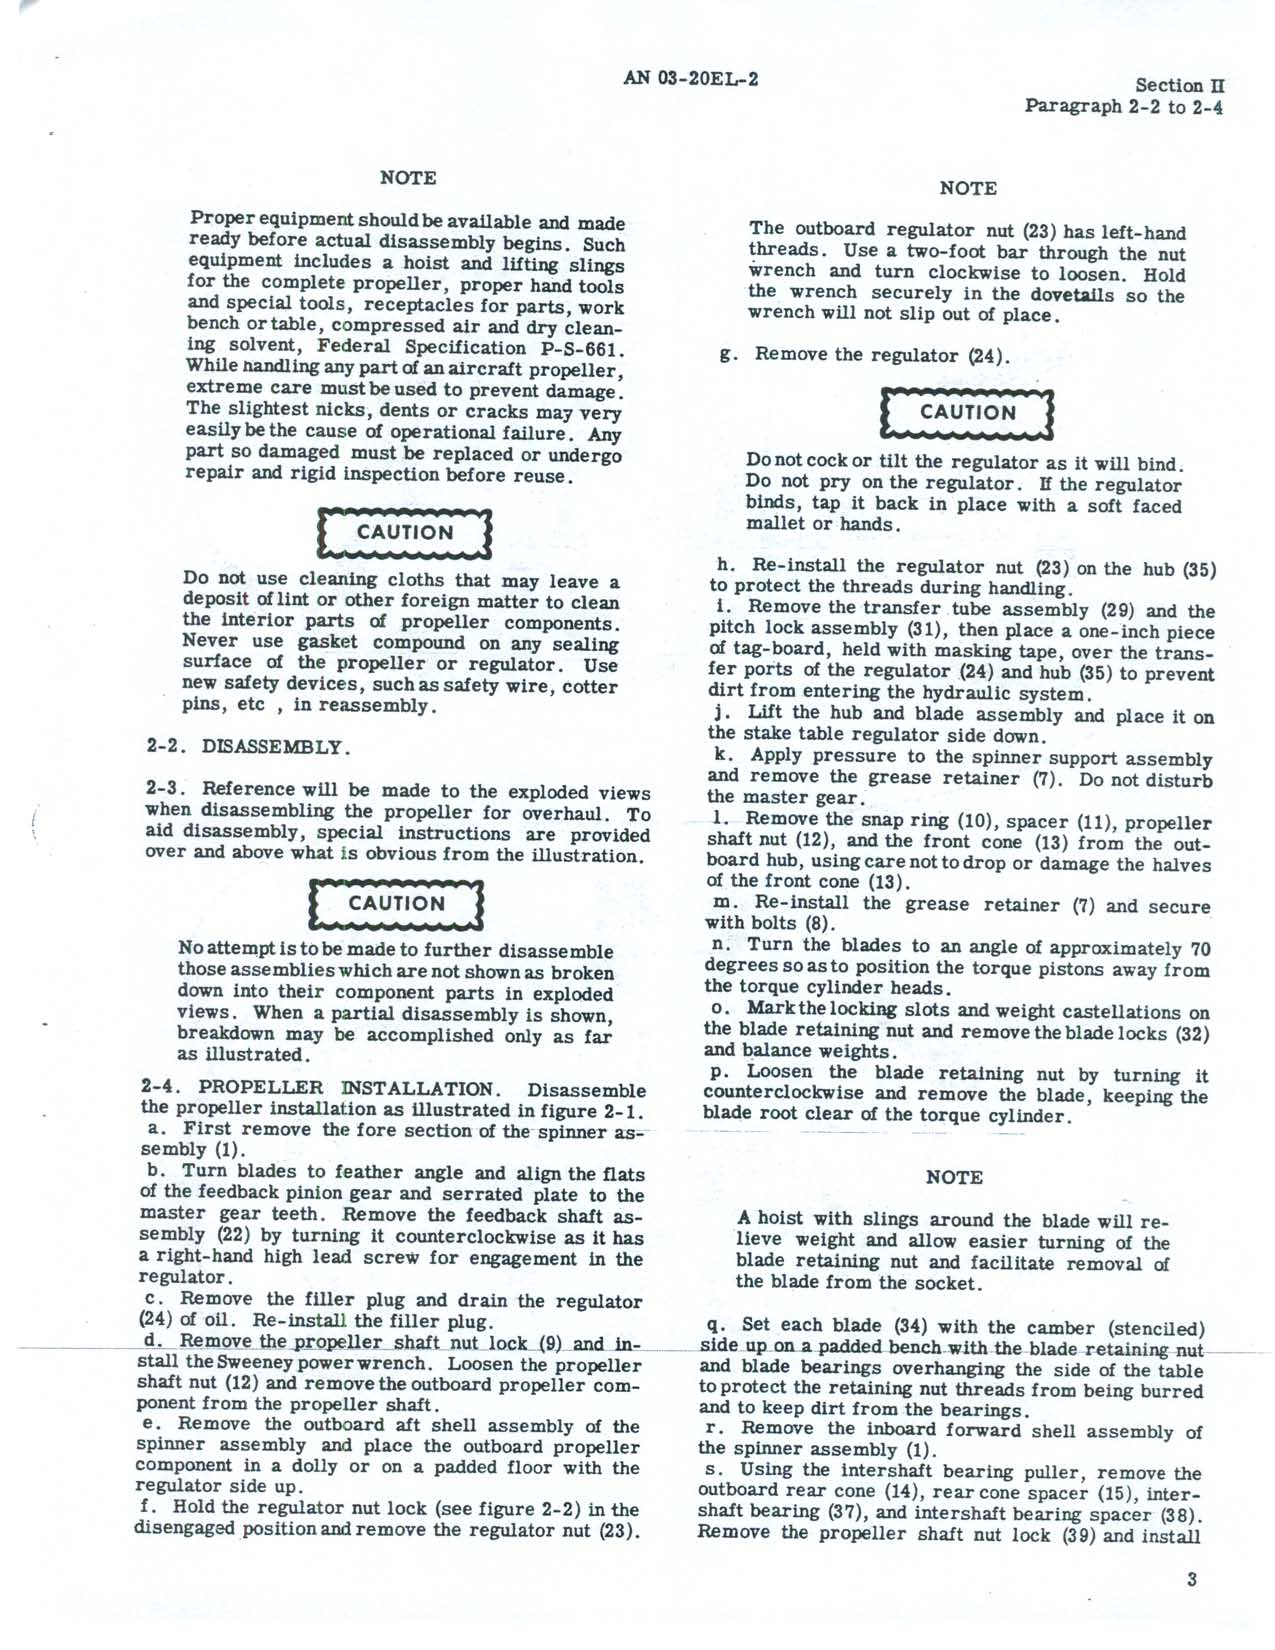 Sample page 6 from AirCorps Library document: Propeller Handbook Overhaul Instructions 